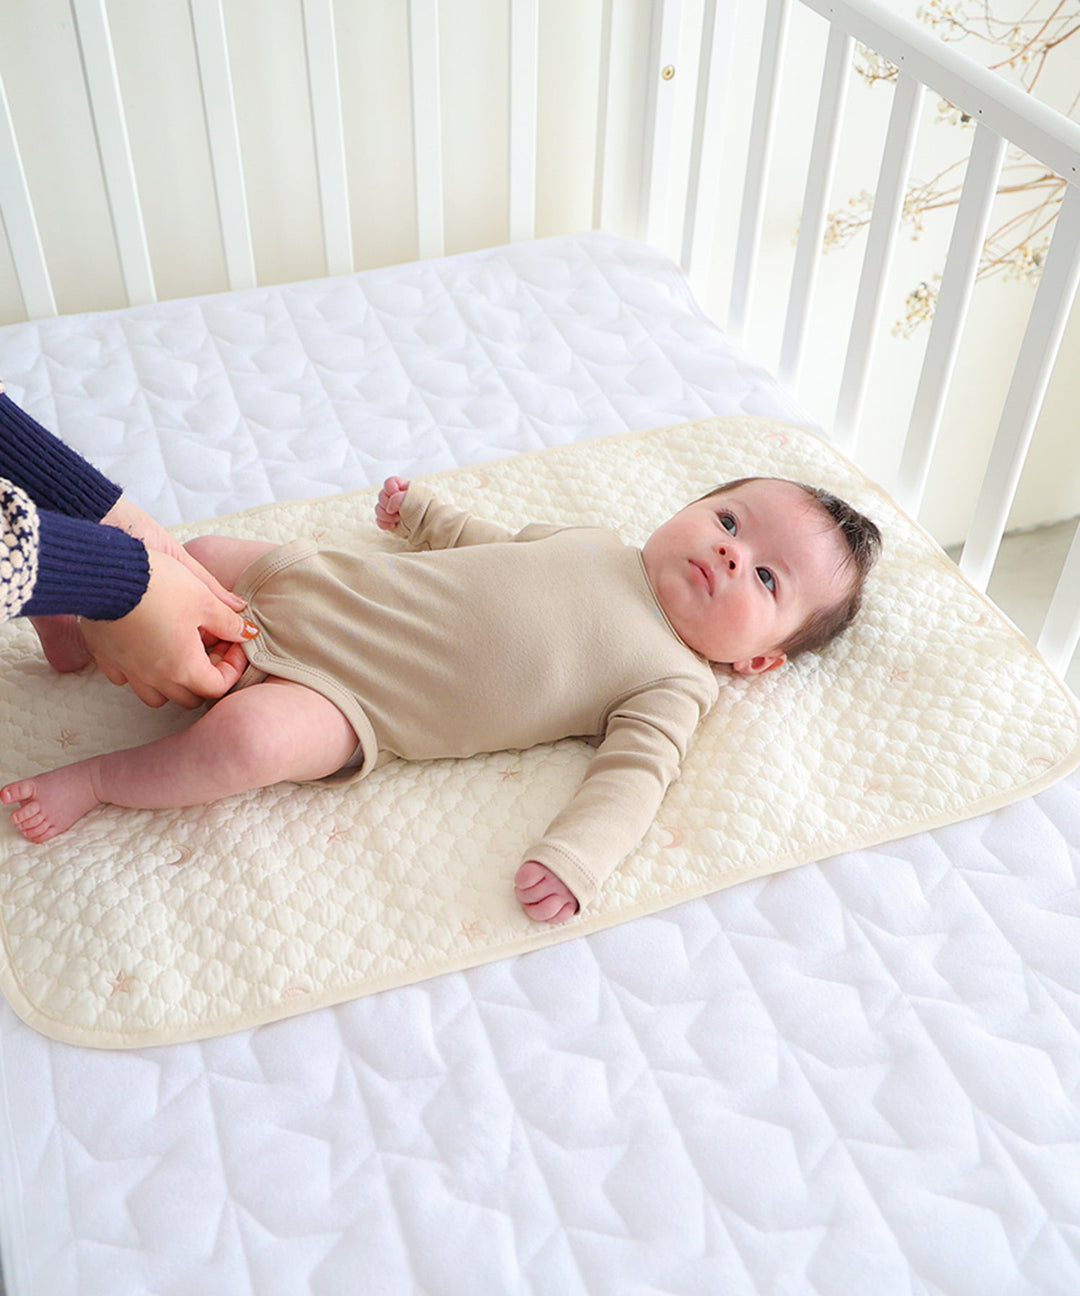 Diaper Changing Pad (Ibul fabric with Moroccan design)